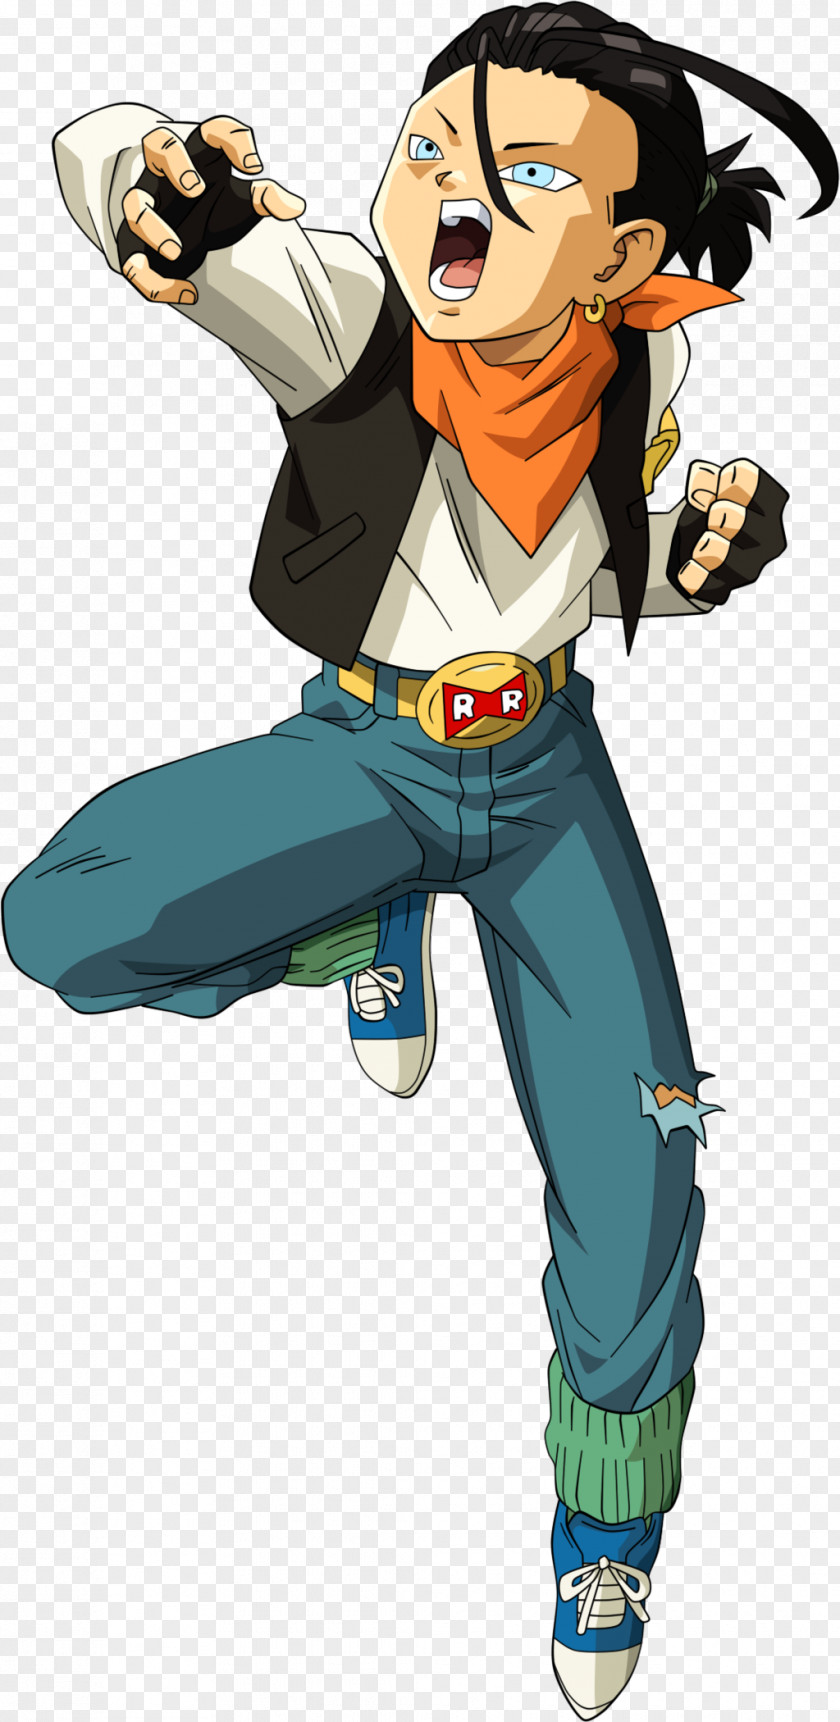 Youtube Dragon Ball Heroes Android 17 YouTube Character PNG